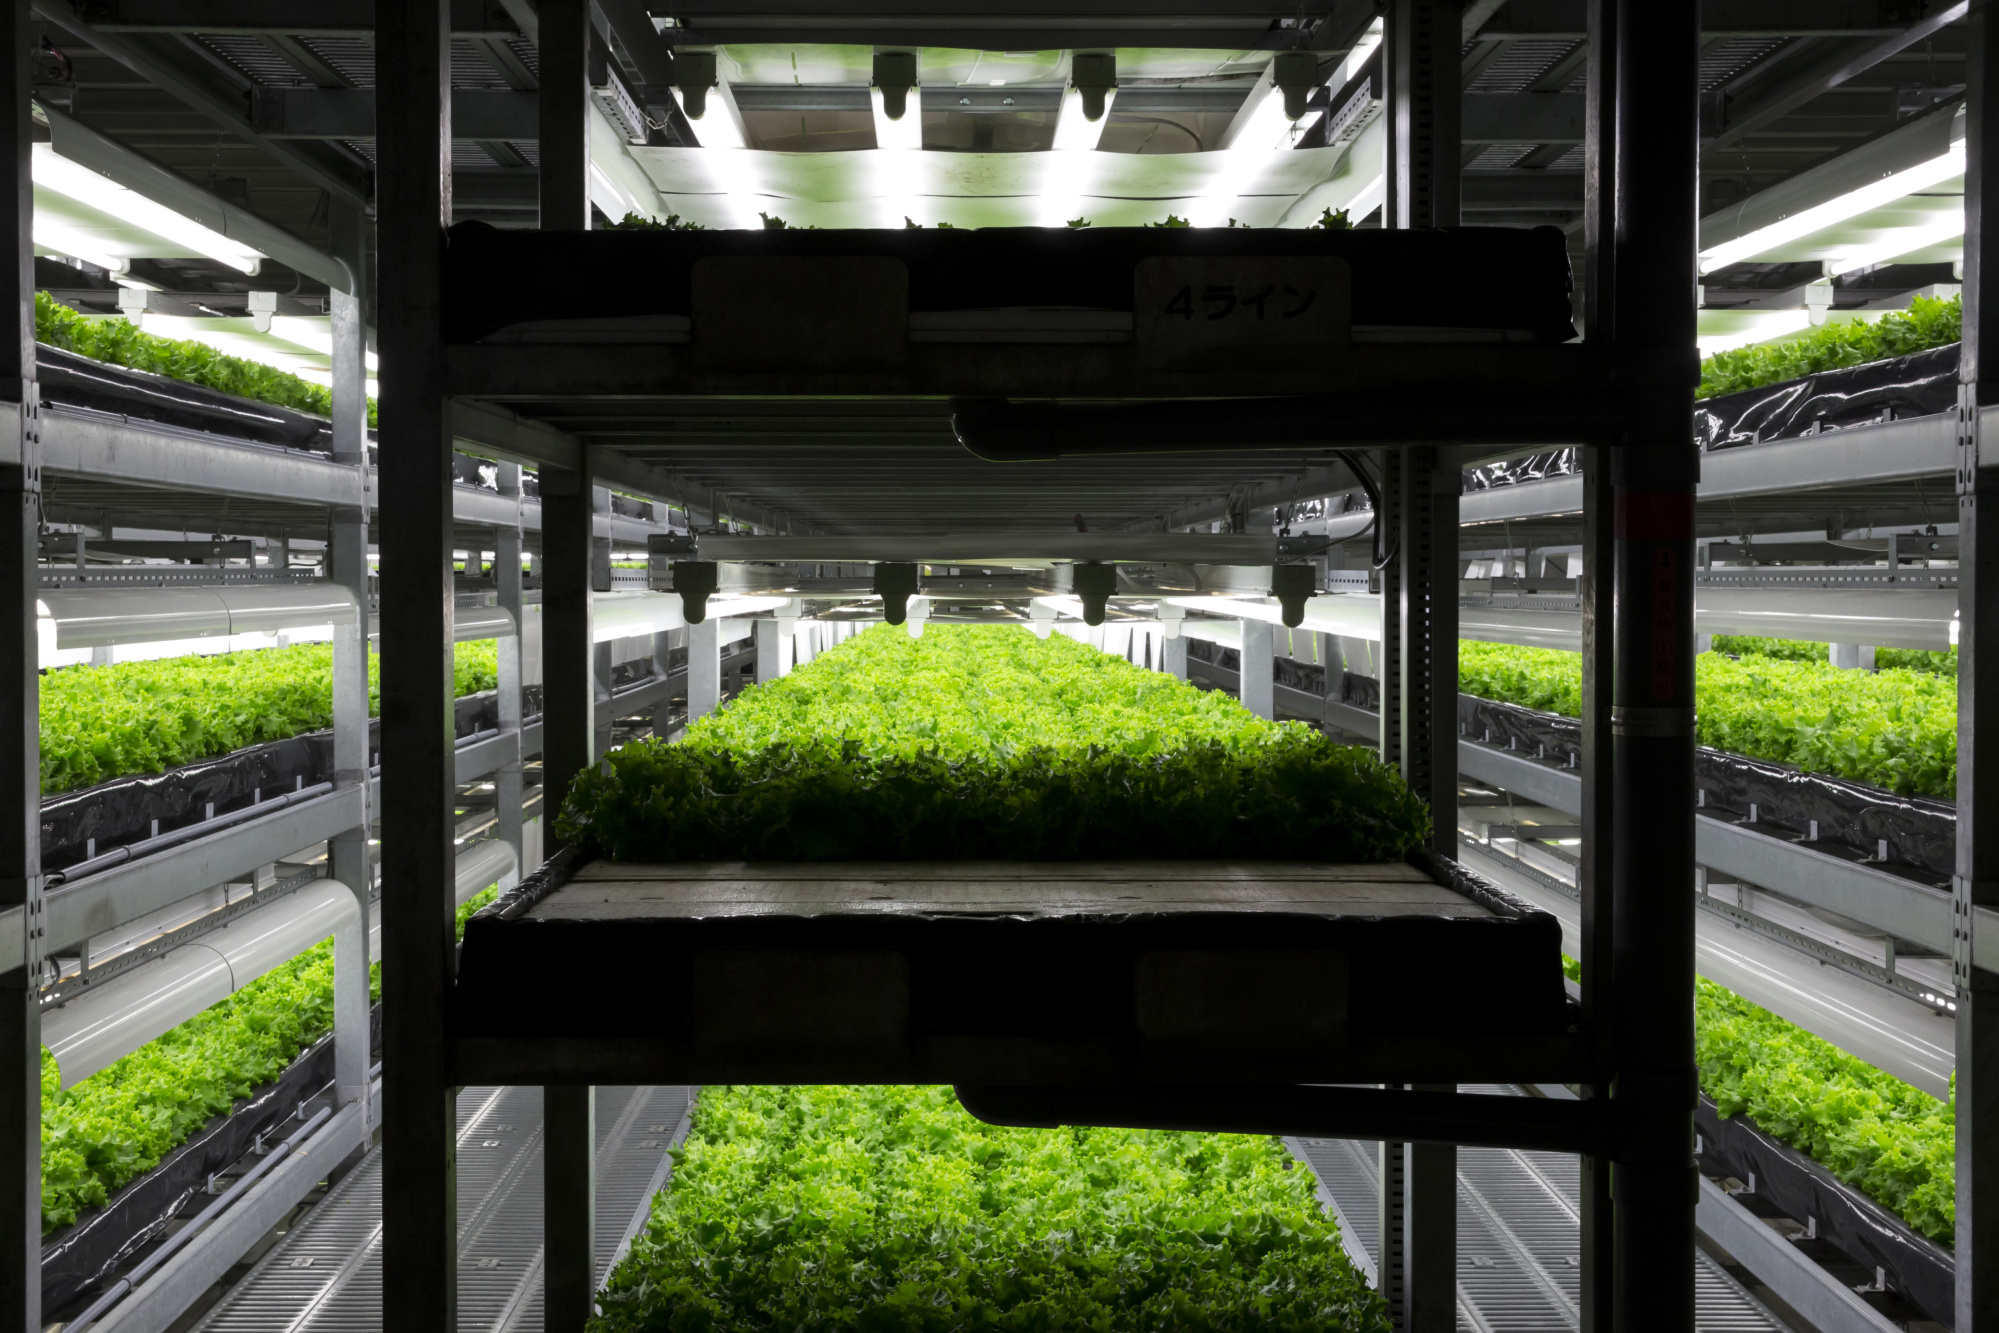 While indoor farms that stack crops in vertical hydroponic rows are nothing new, Bayer is betting its expertise in seeds will give it a valuable edge.